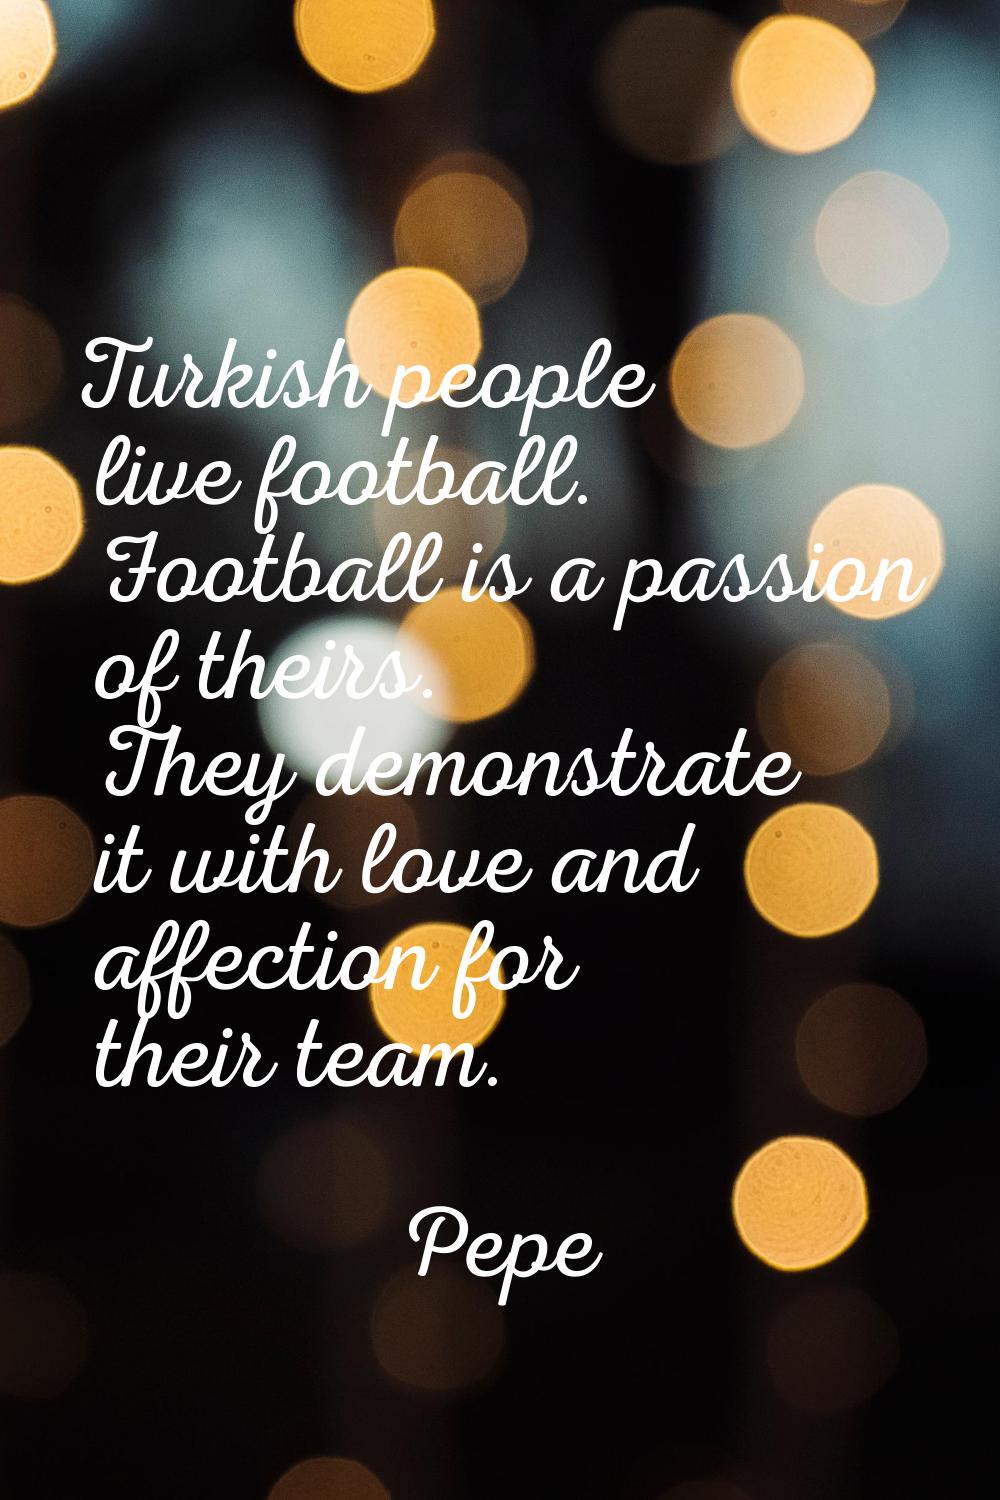 Turkish people live football. Football is a passion of theirs. They demonstrate it with love and af